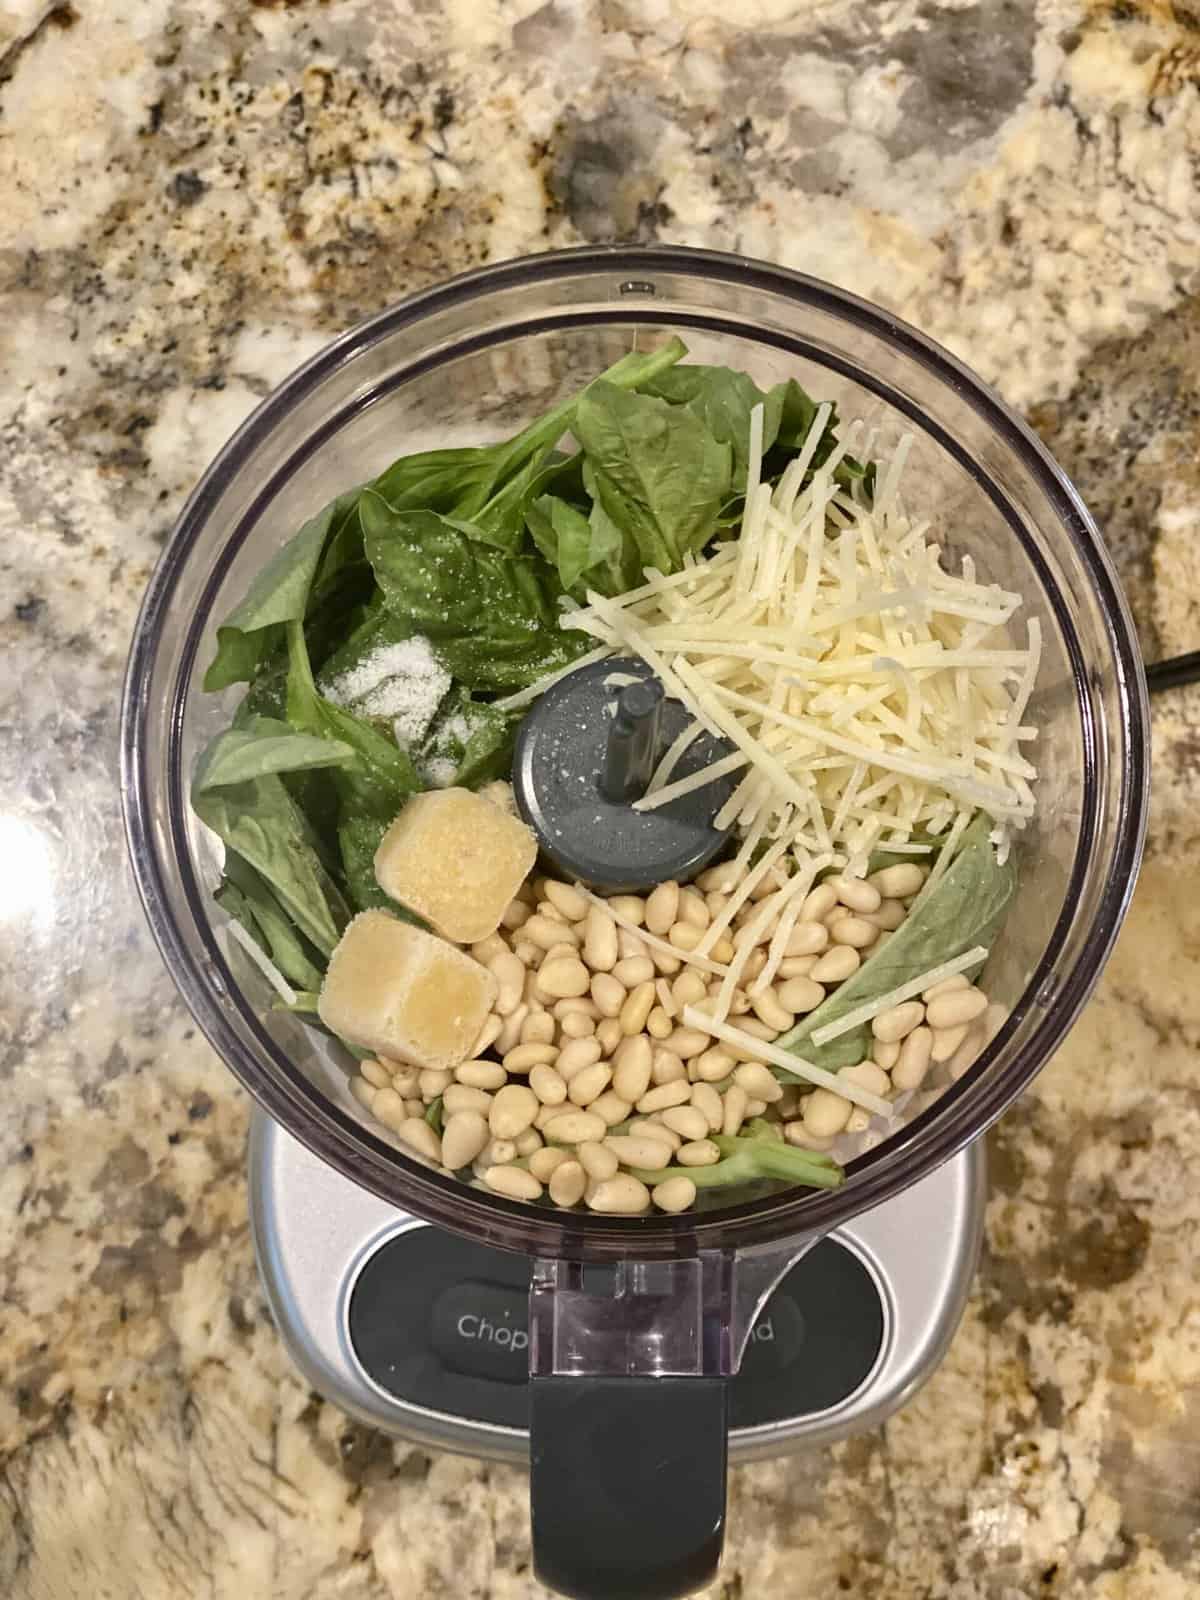 Ingredients for pesto in a food processor.